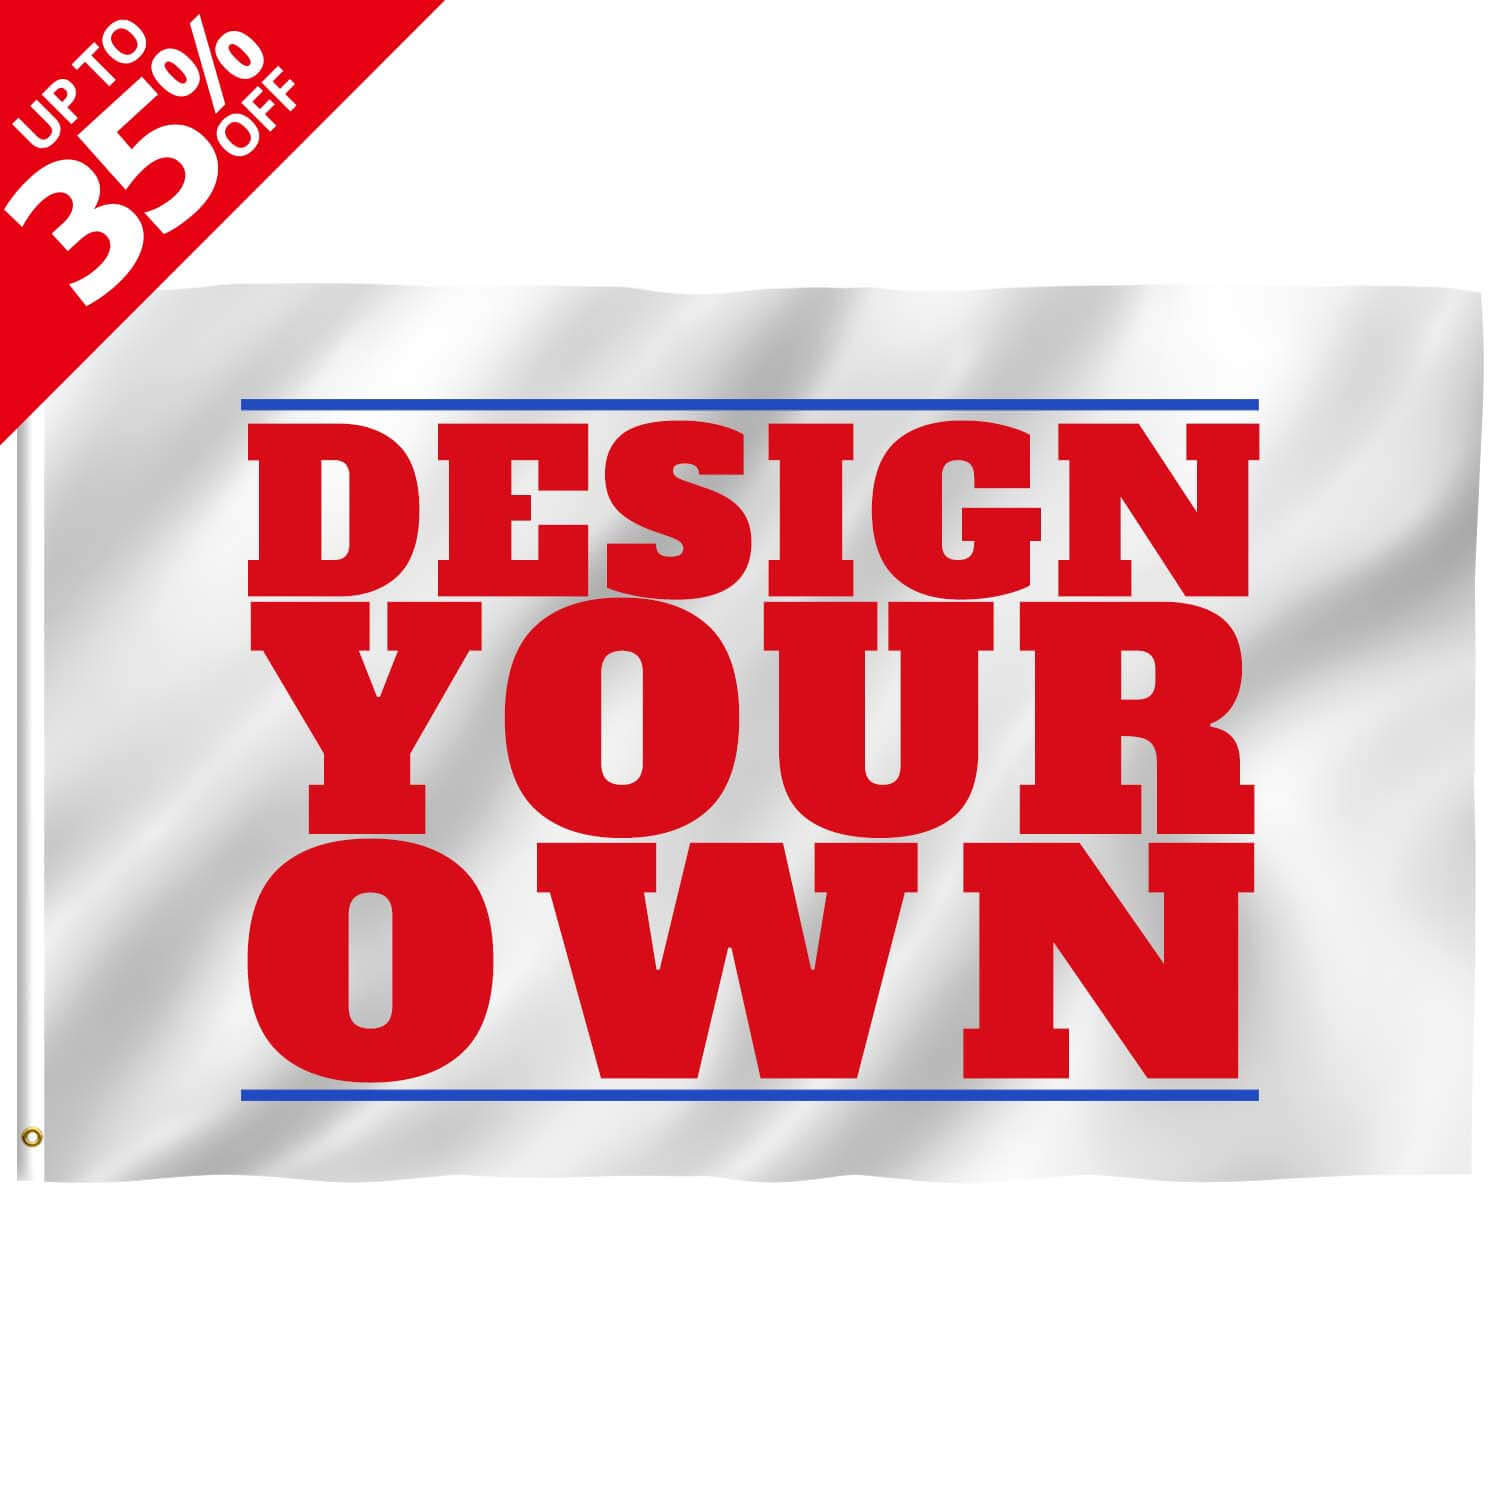 Custom Flag For Sale, Residential & Commericial Use